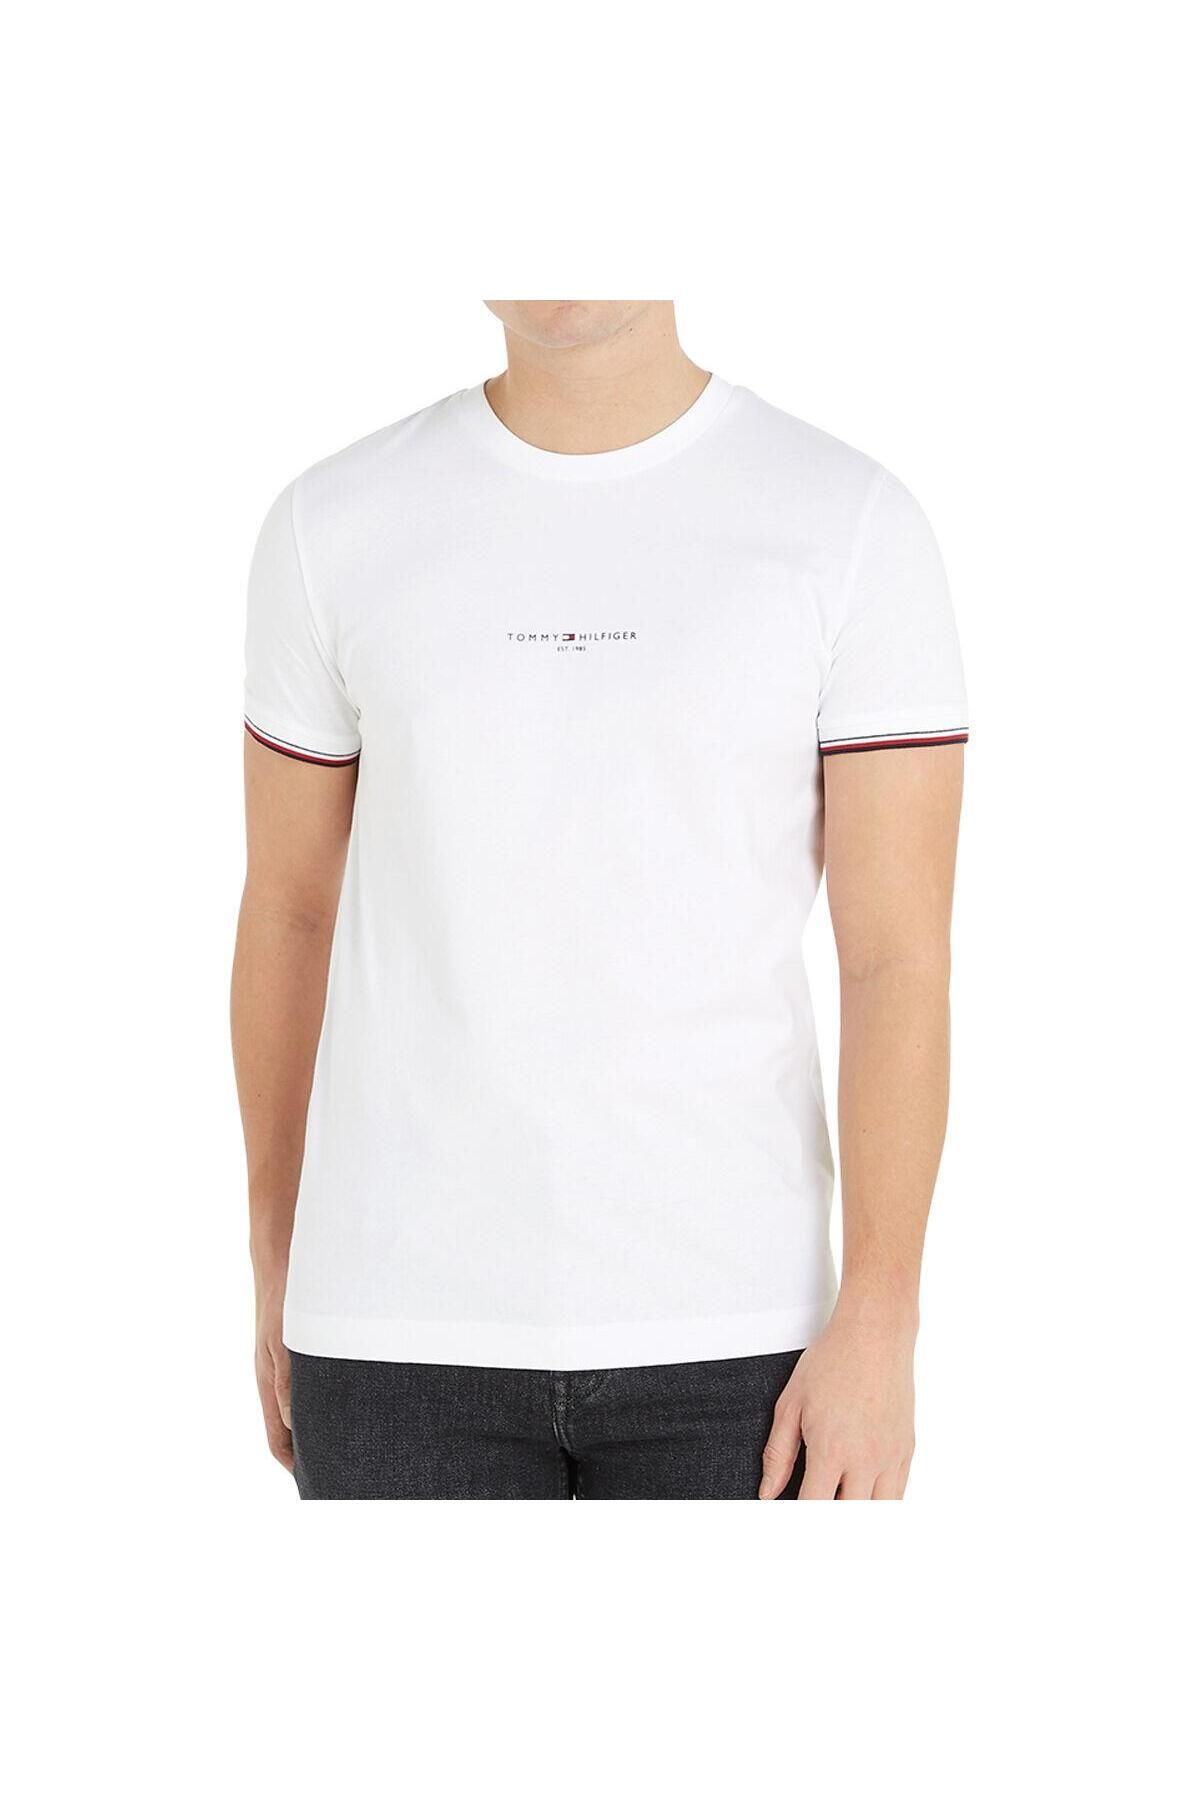 Tommy Hilfiger TOMMY LOGO TIPPED TEE